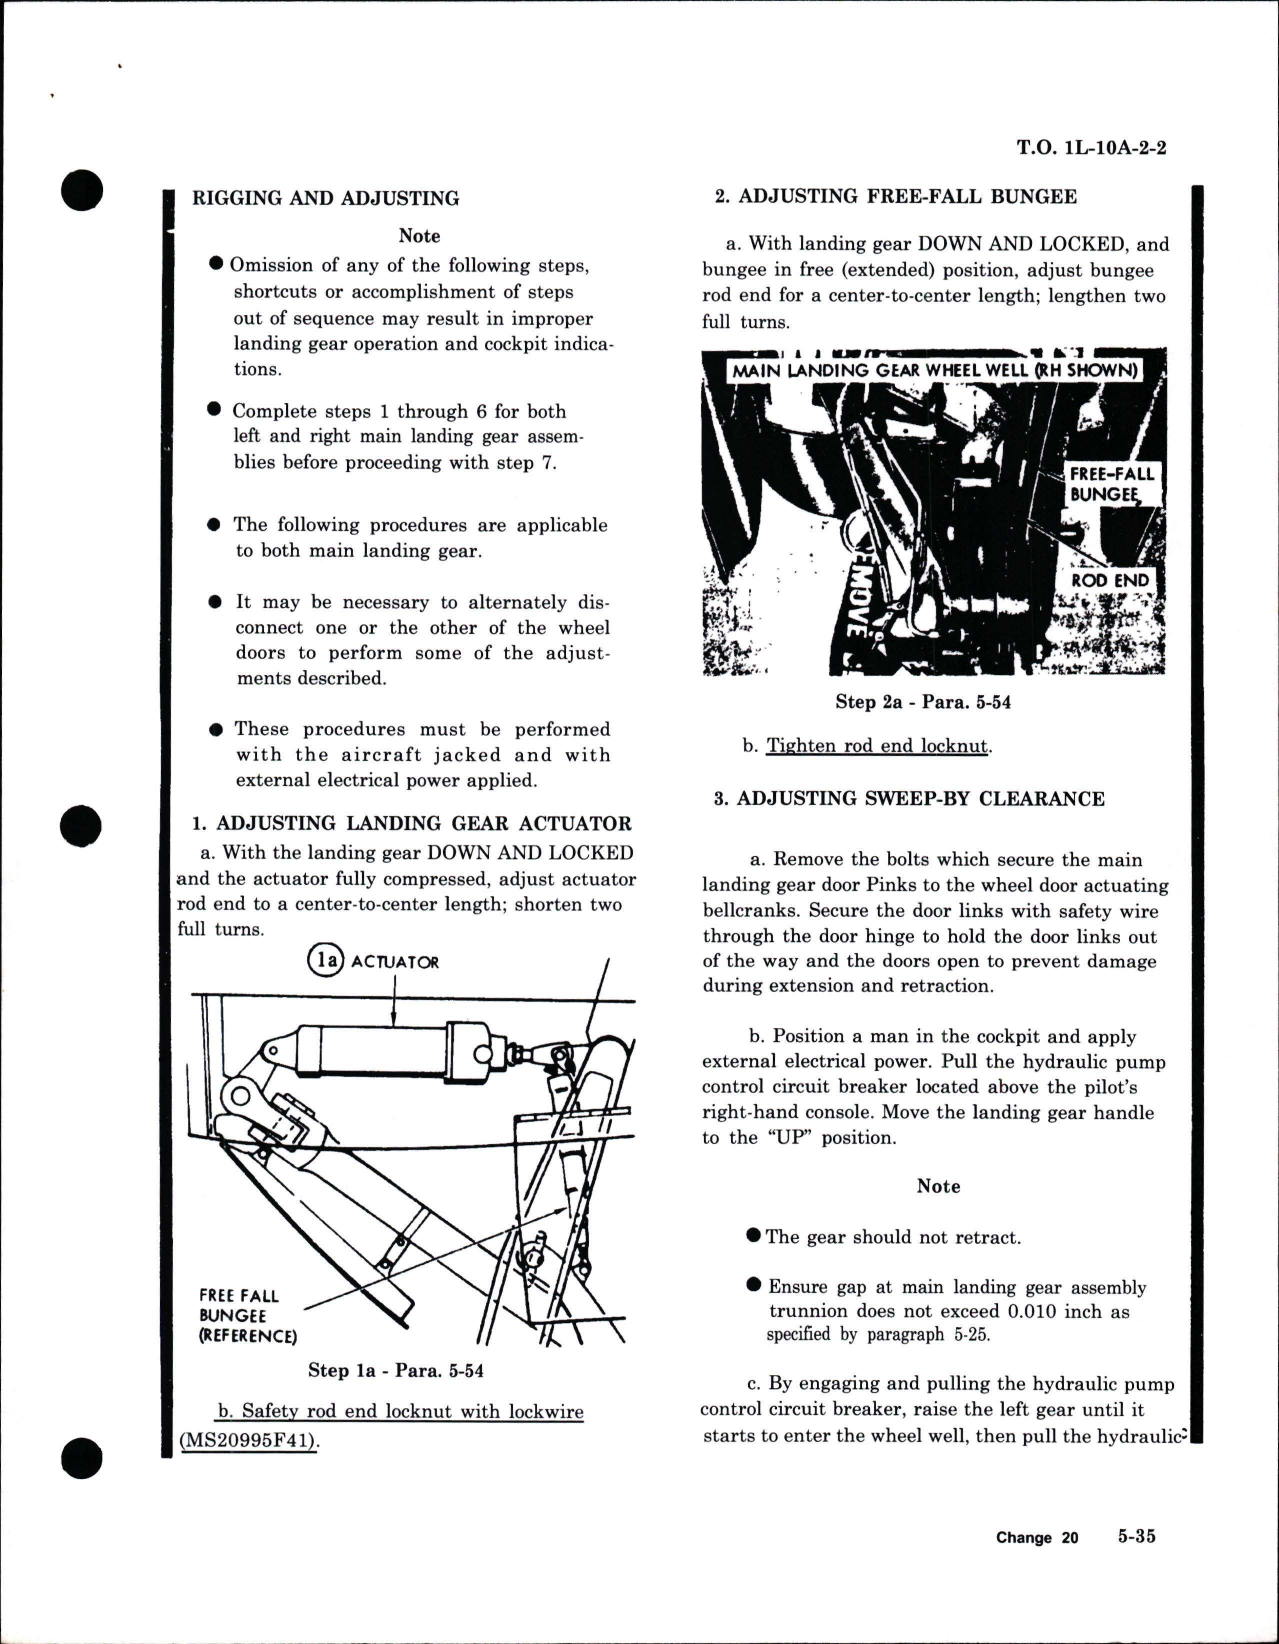 Sample page 9 from AirCorps Library document: Maintenance Instructions for Airframe Systems on OV-10A